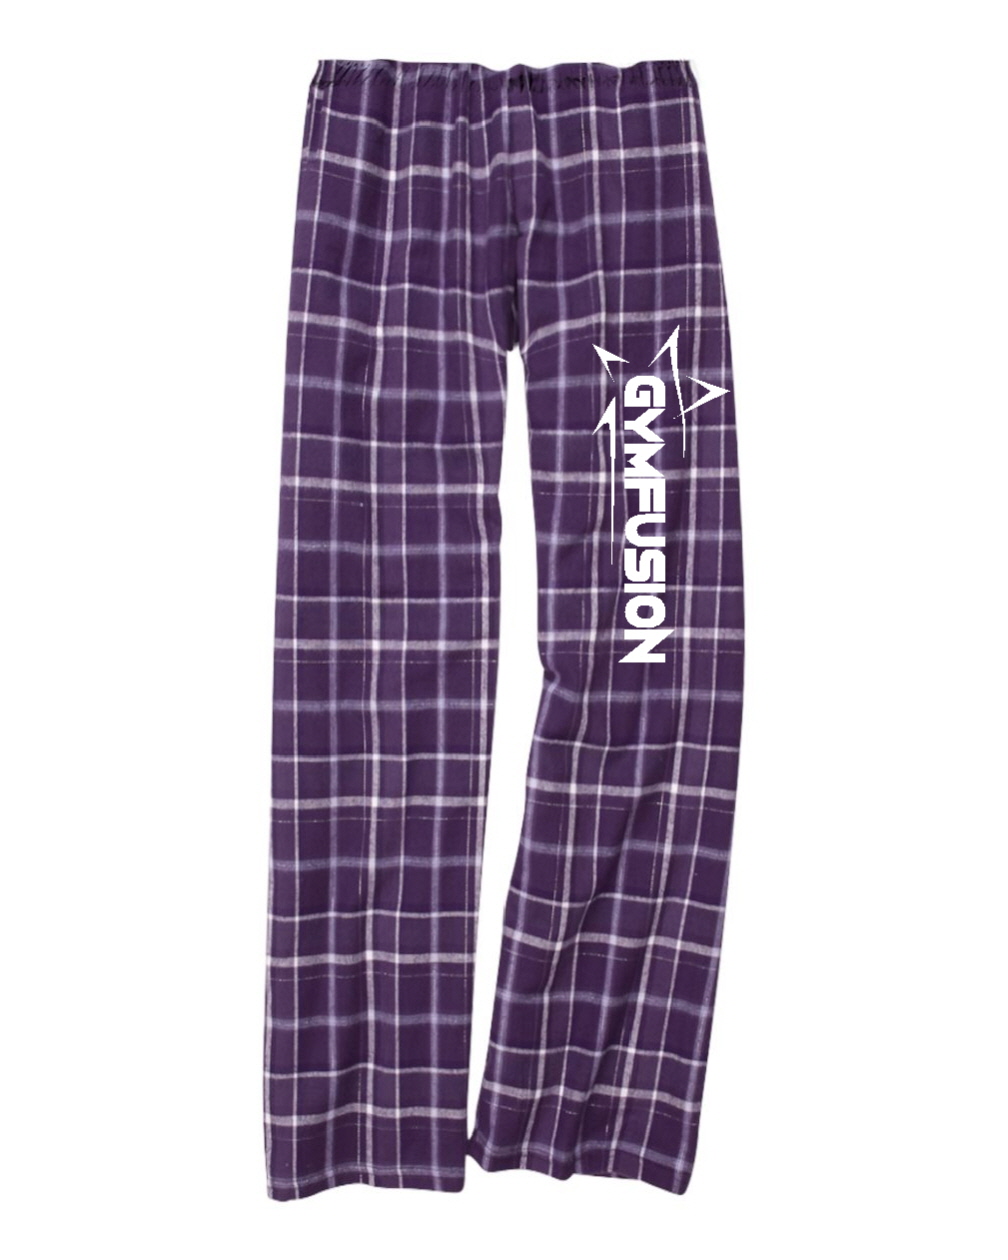 Flannel Pants with Pockets purple